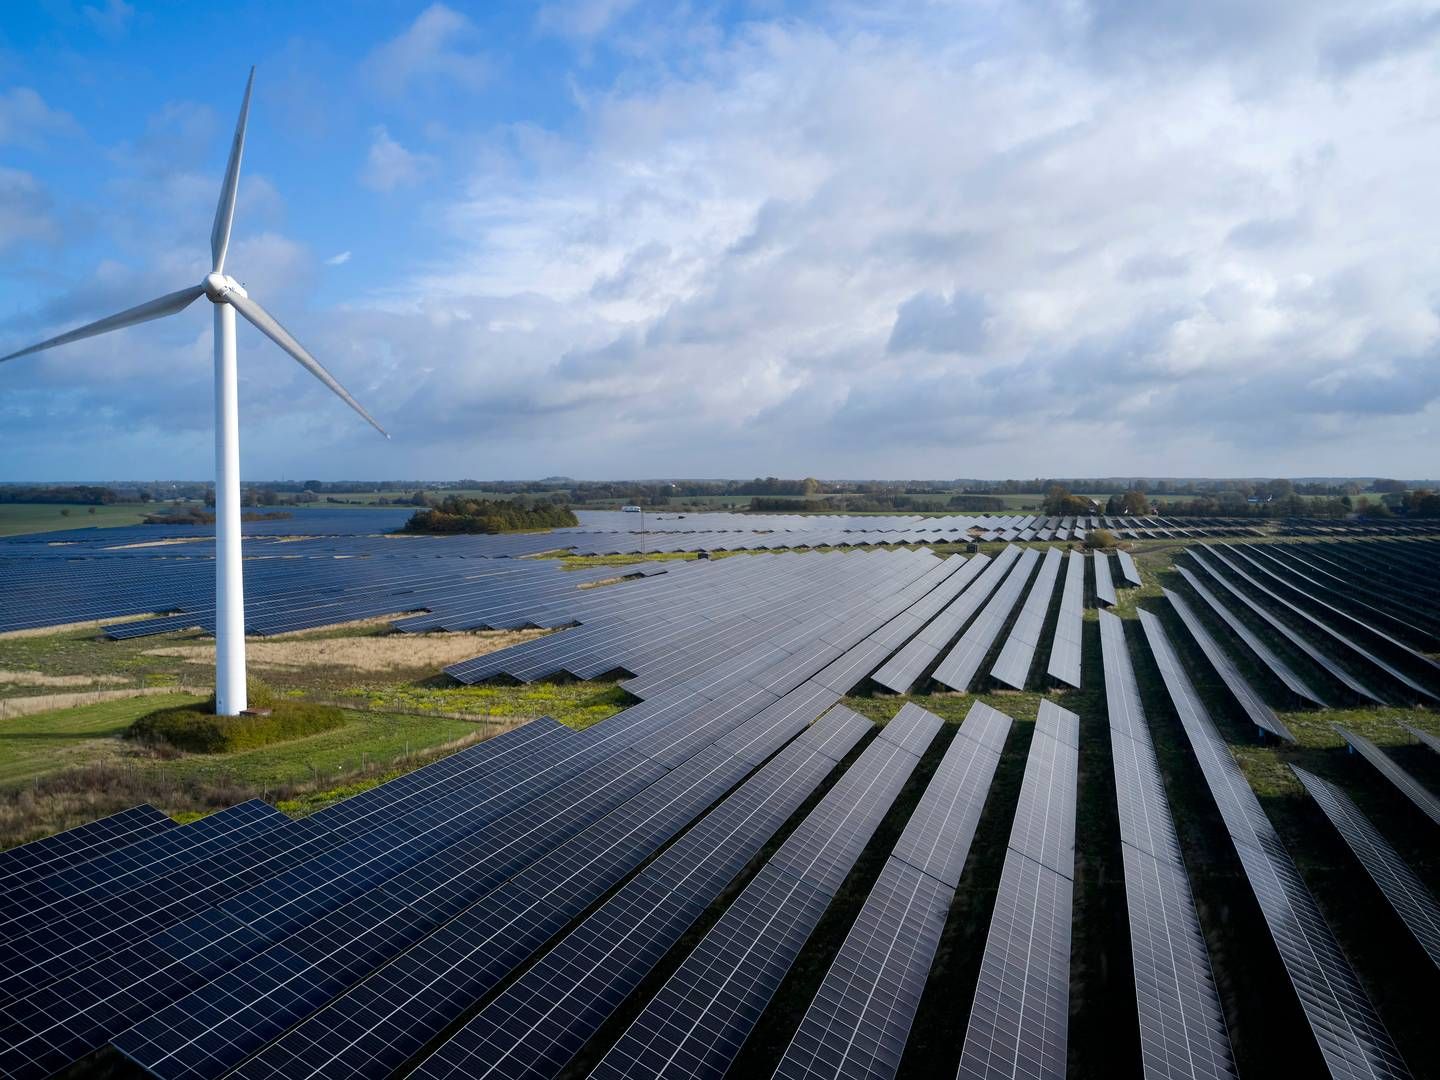 Solar PV and wind turbines should be allowed to take up more space if the EU is to achieve its renewable energy targets. But challenges are mounting. | Photo: Jens Dresling